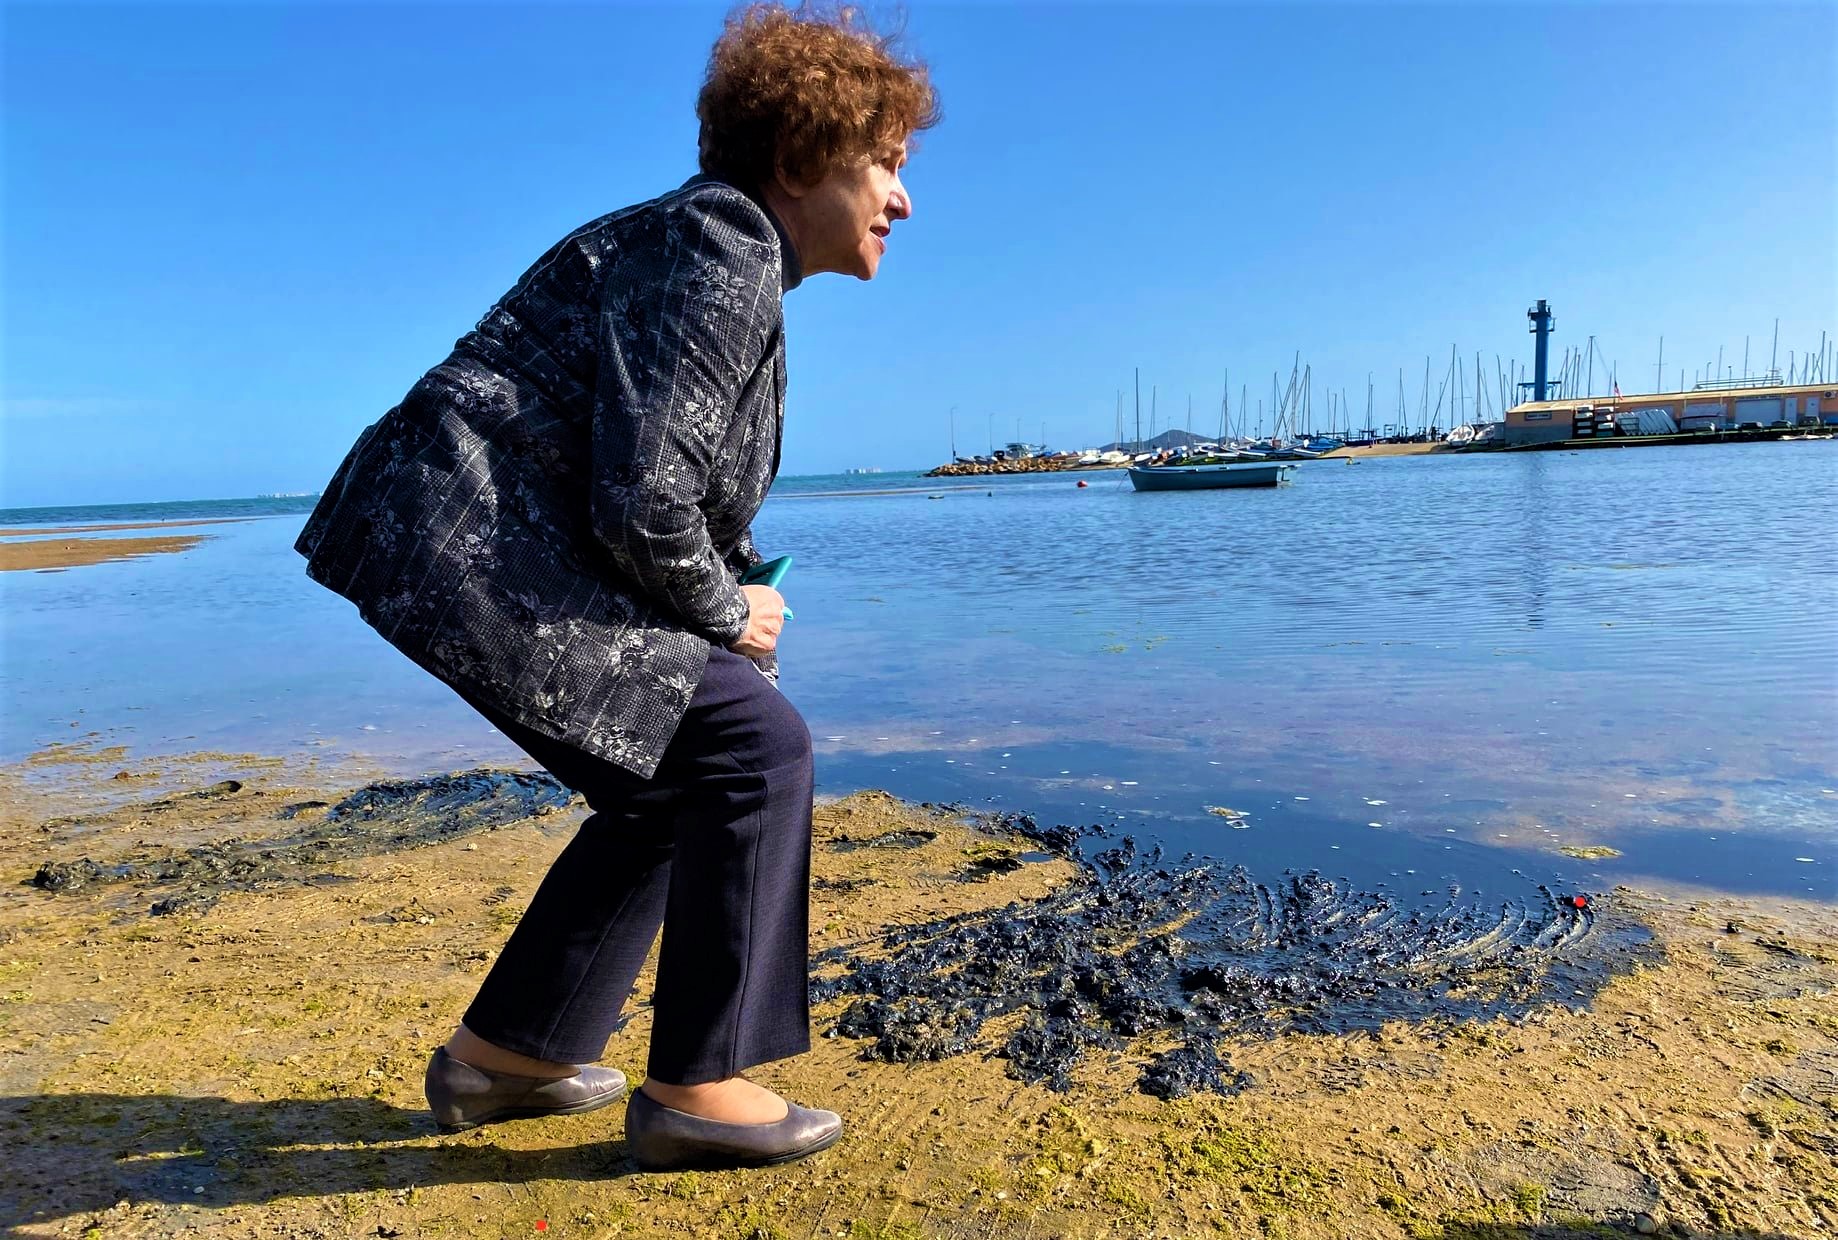 European Mps End Three Day Visit To Spain's Mar Menor Lagoon To Review Pollution Problems